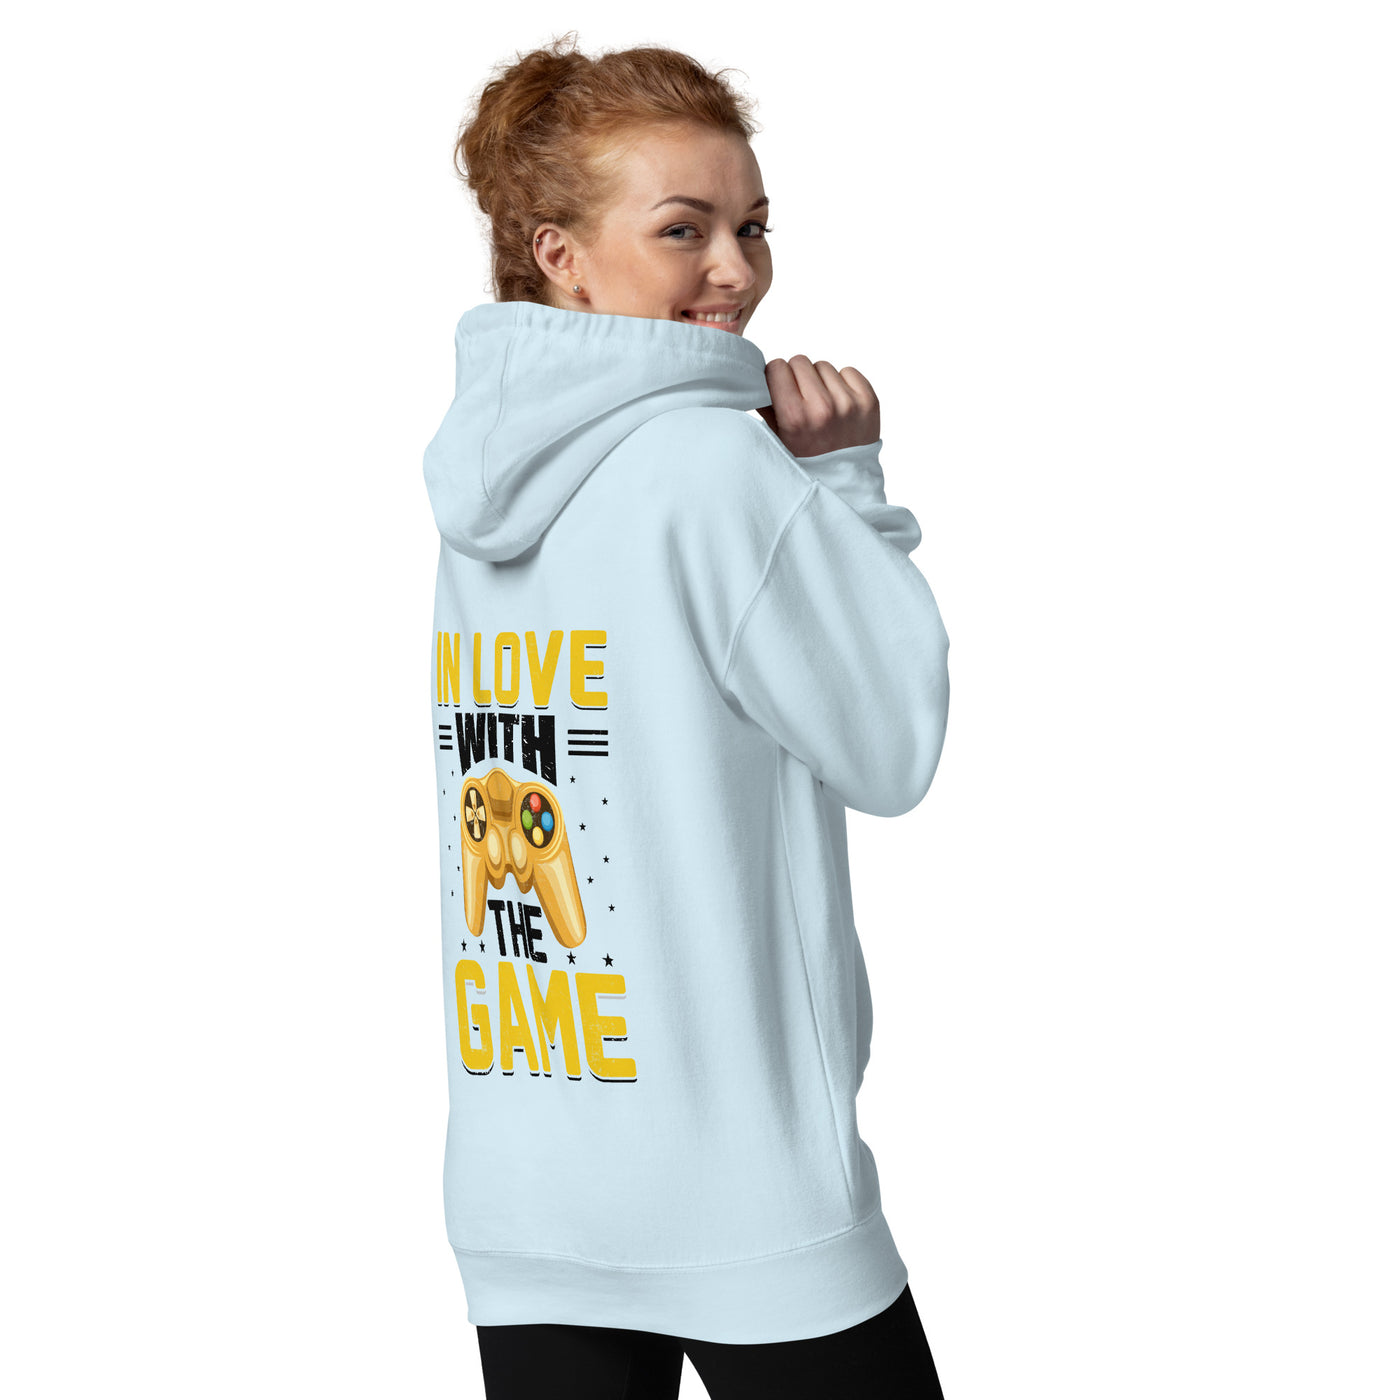 In Love With The Game in Dark Text - Unisex Hoodie ( Back Print )